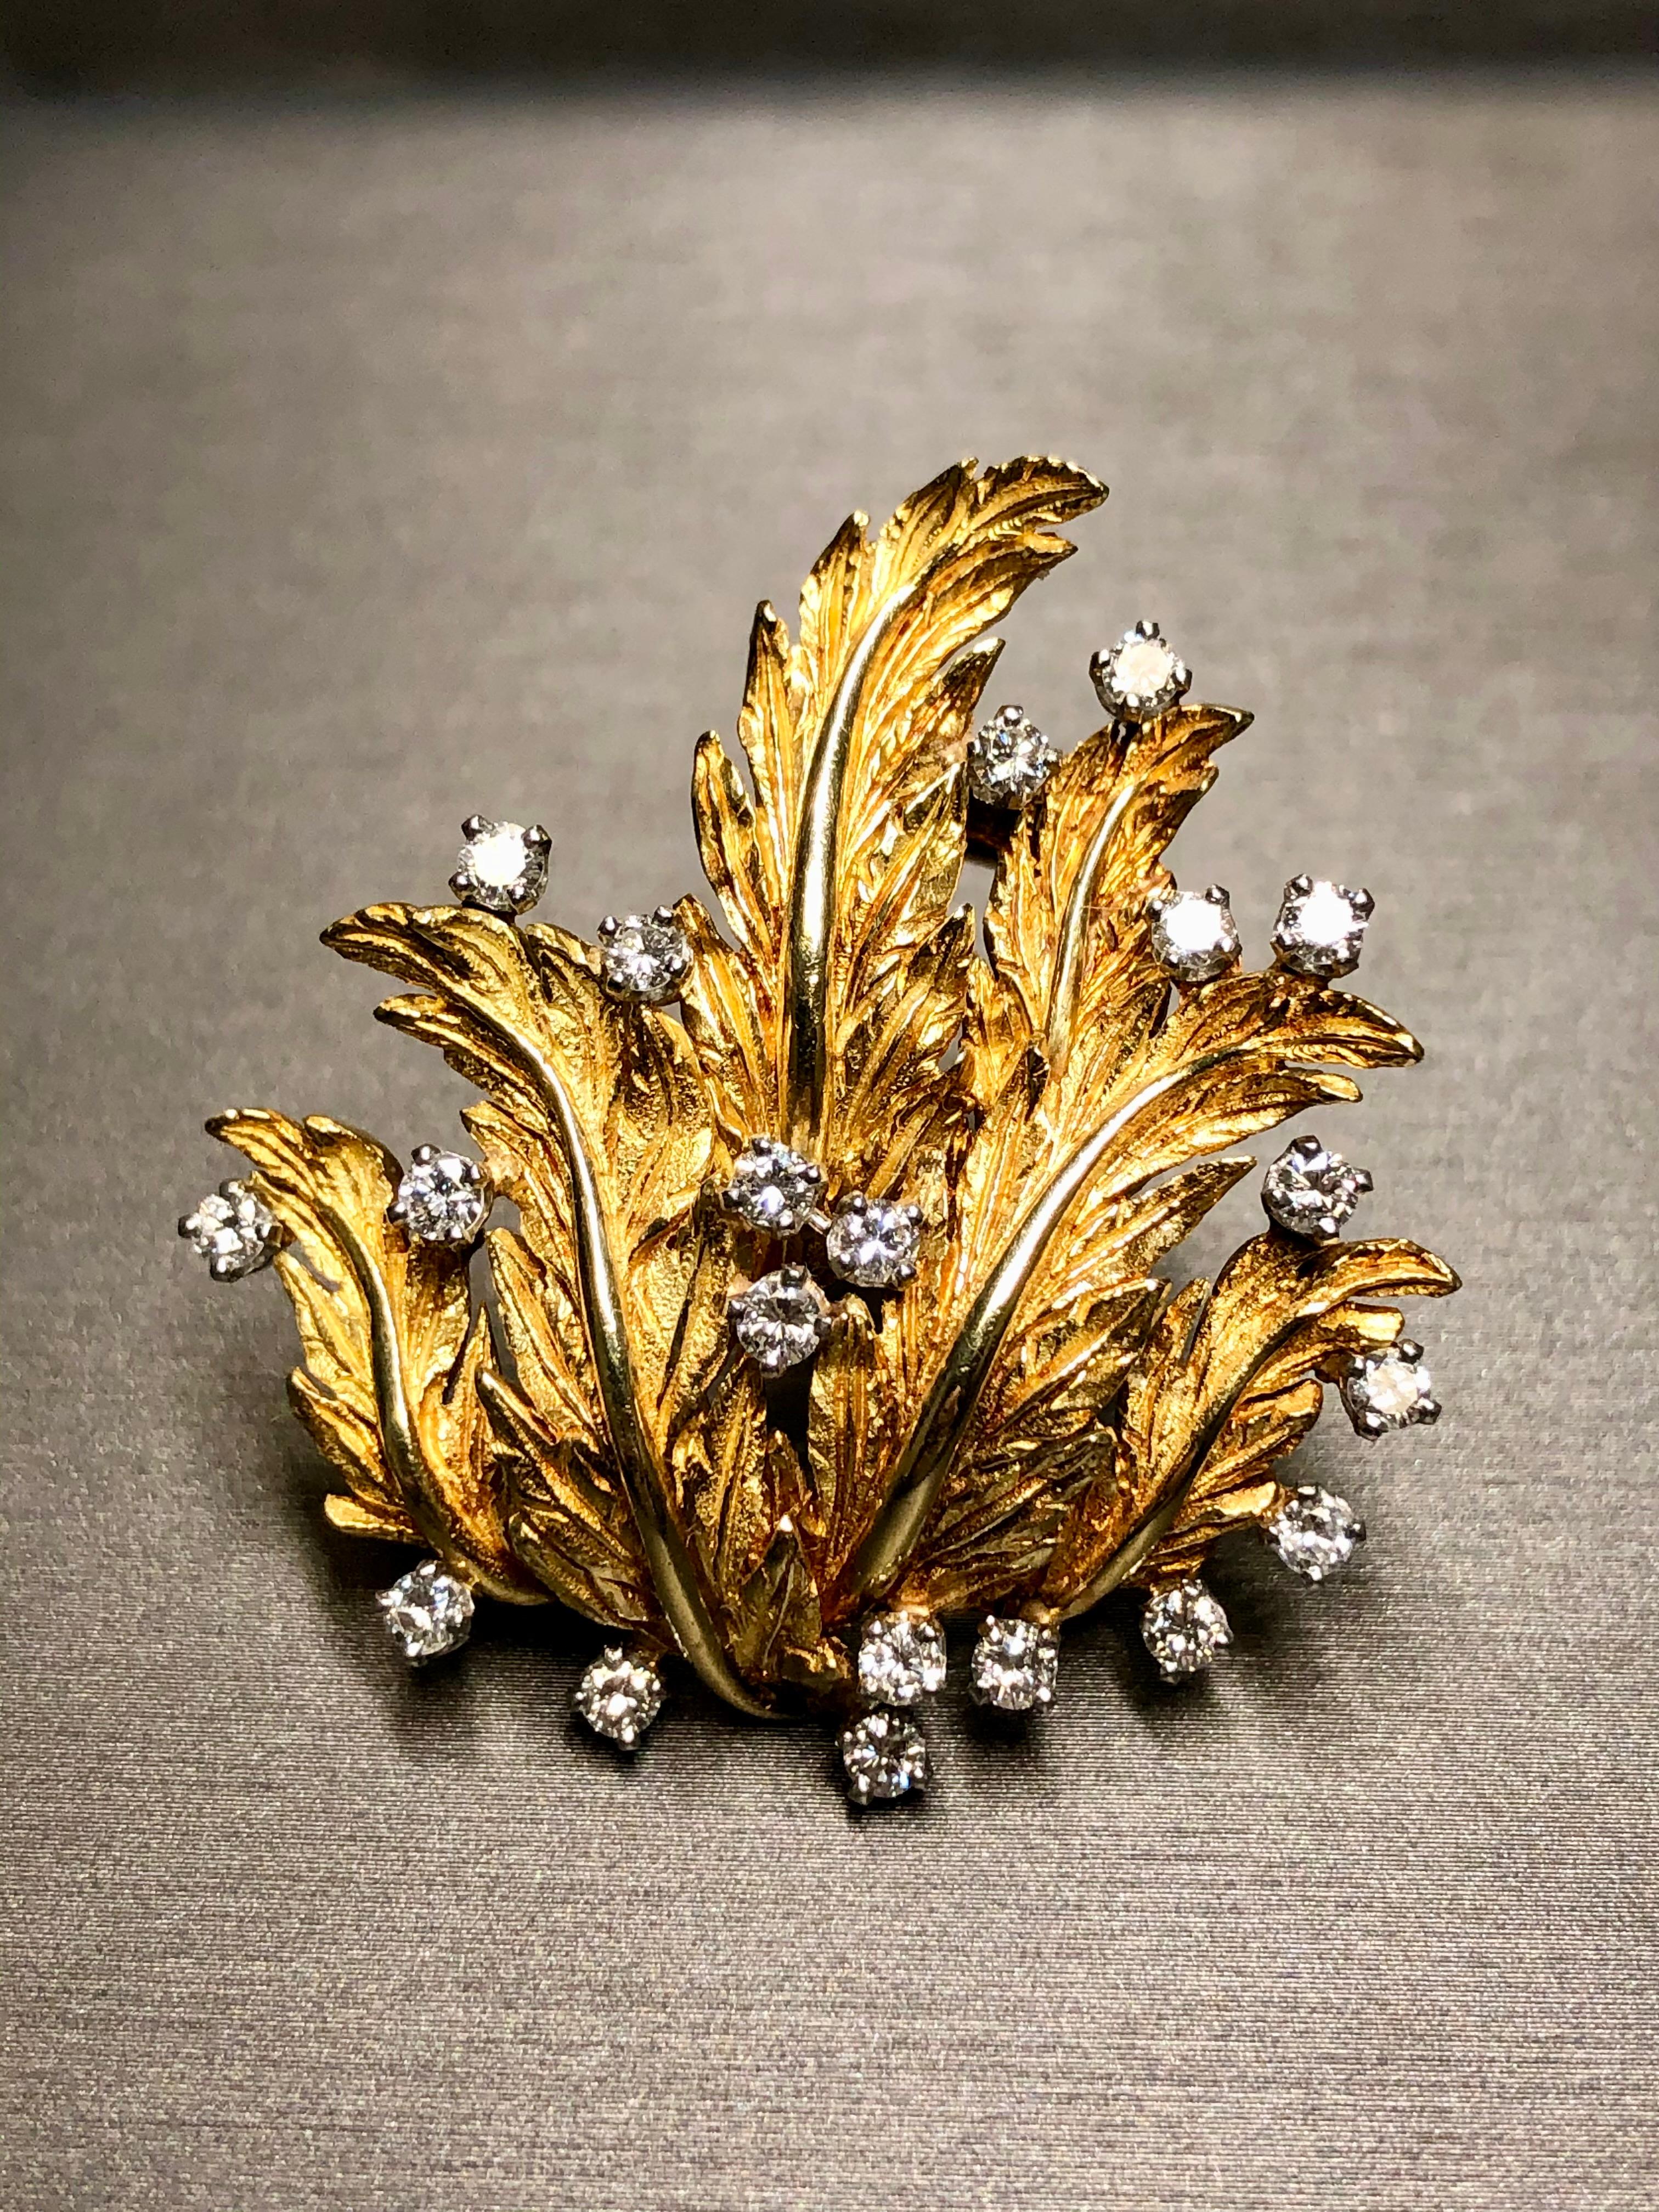 An elegantly designed brooch done in 18K yellow gold, prong set with approximately 1.20cttw in G-H color Vs1-2 clarity round prong set diamonds.


Dimensions/Weight:

Brooch measures 1.5” by 1.5” and weighs 22g.


Condition:

All stones are secure